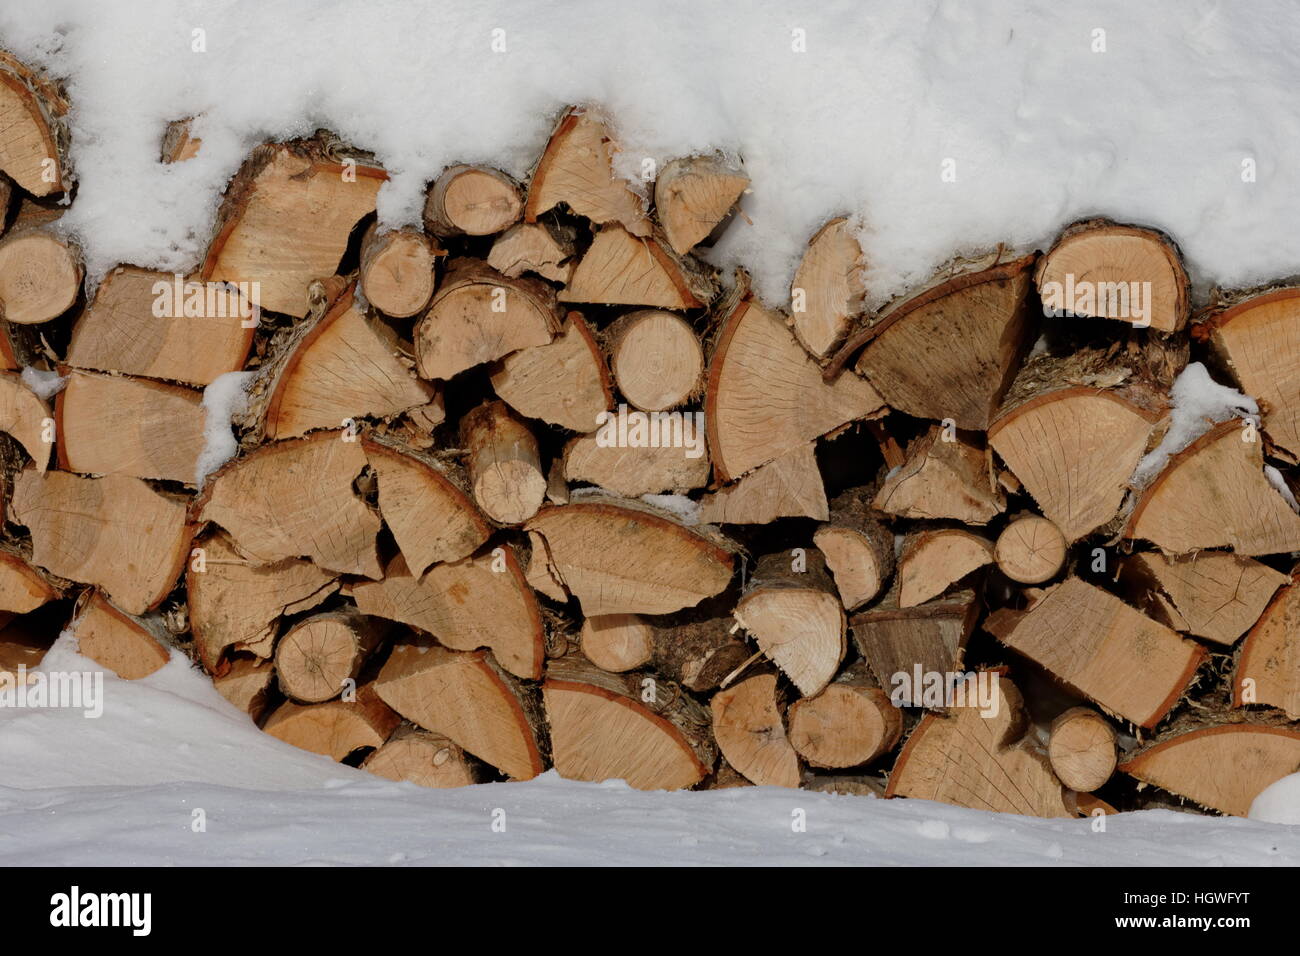 Snow covered firewood Stock Photo